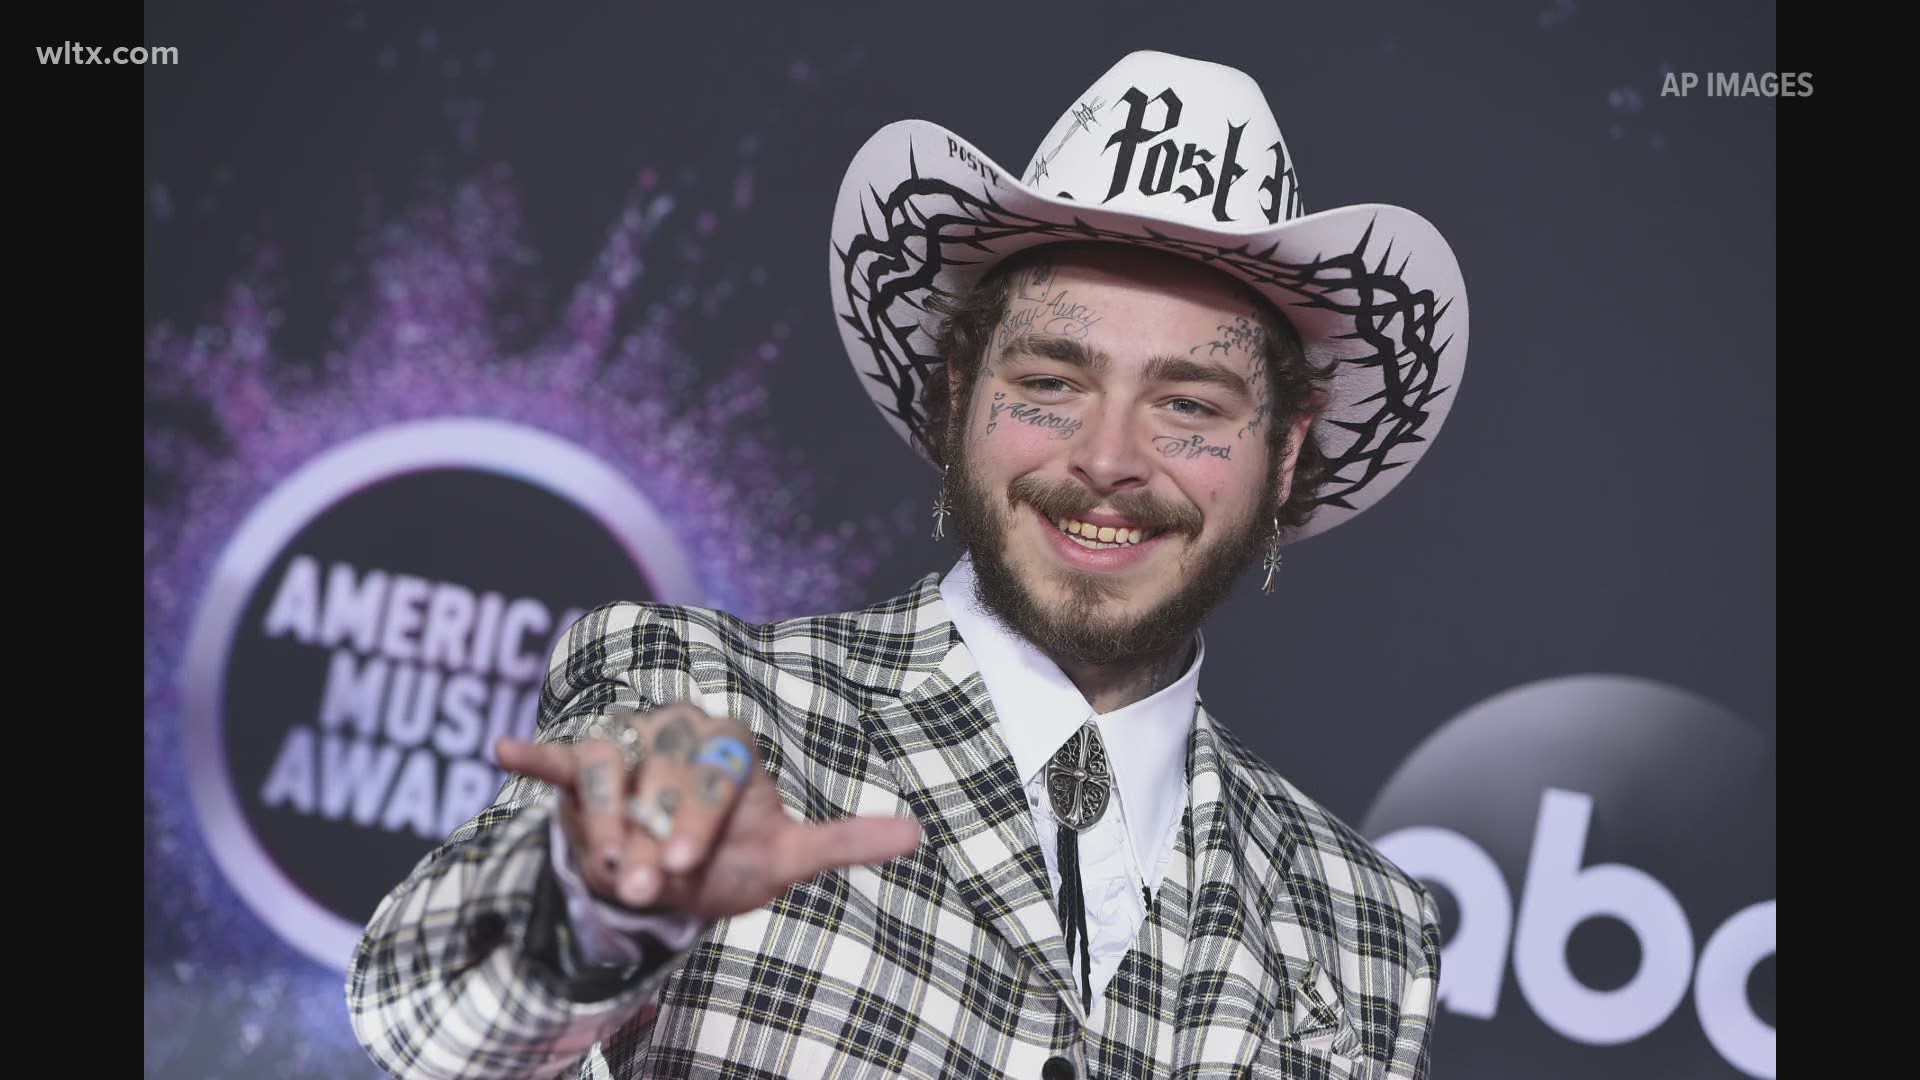 Post Malone has released a cover of Hootie & The Blowfish's iconic song "Only Wanna be with You."